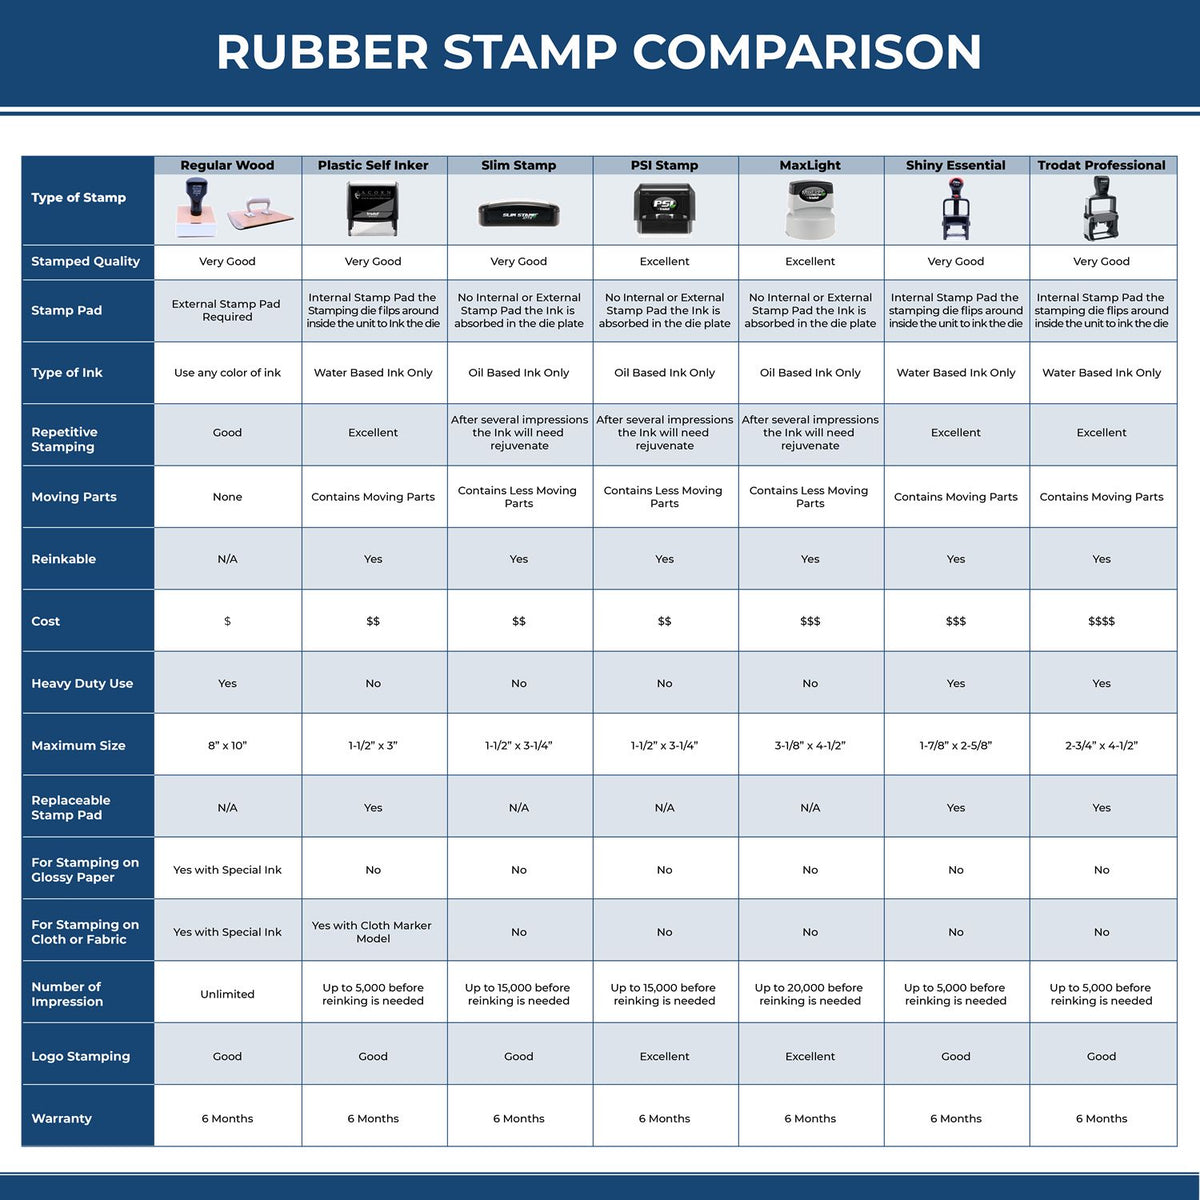 A comparison chart for the different types of mount models available for the Maine Professional Engineer Seal Stamp.